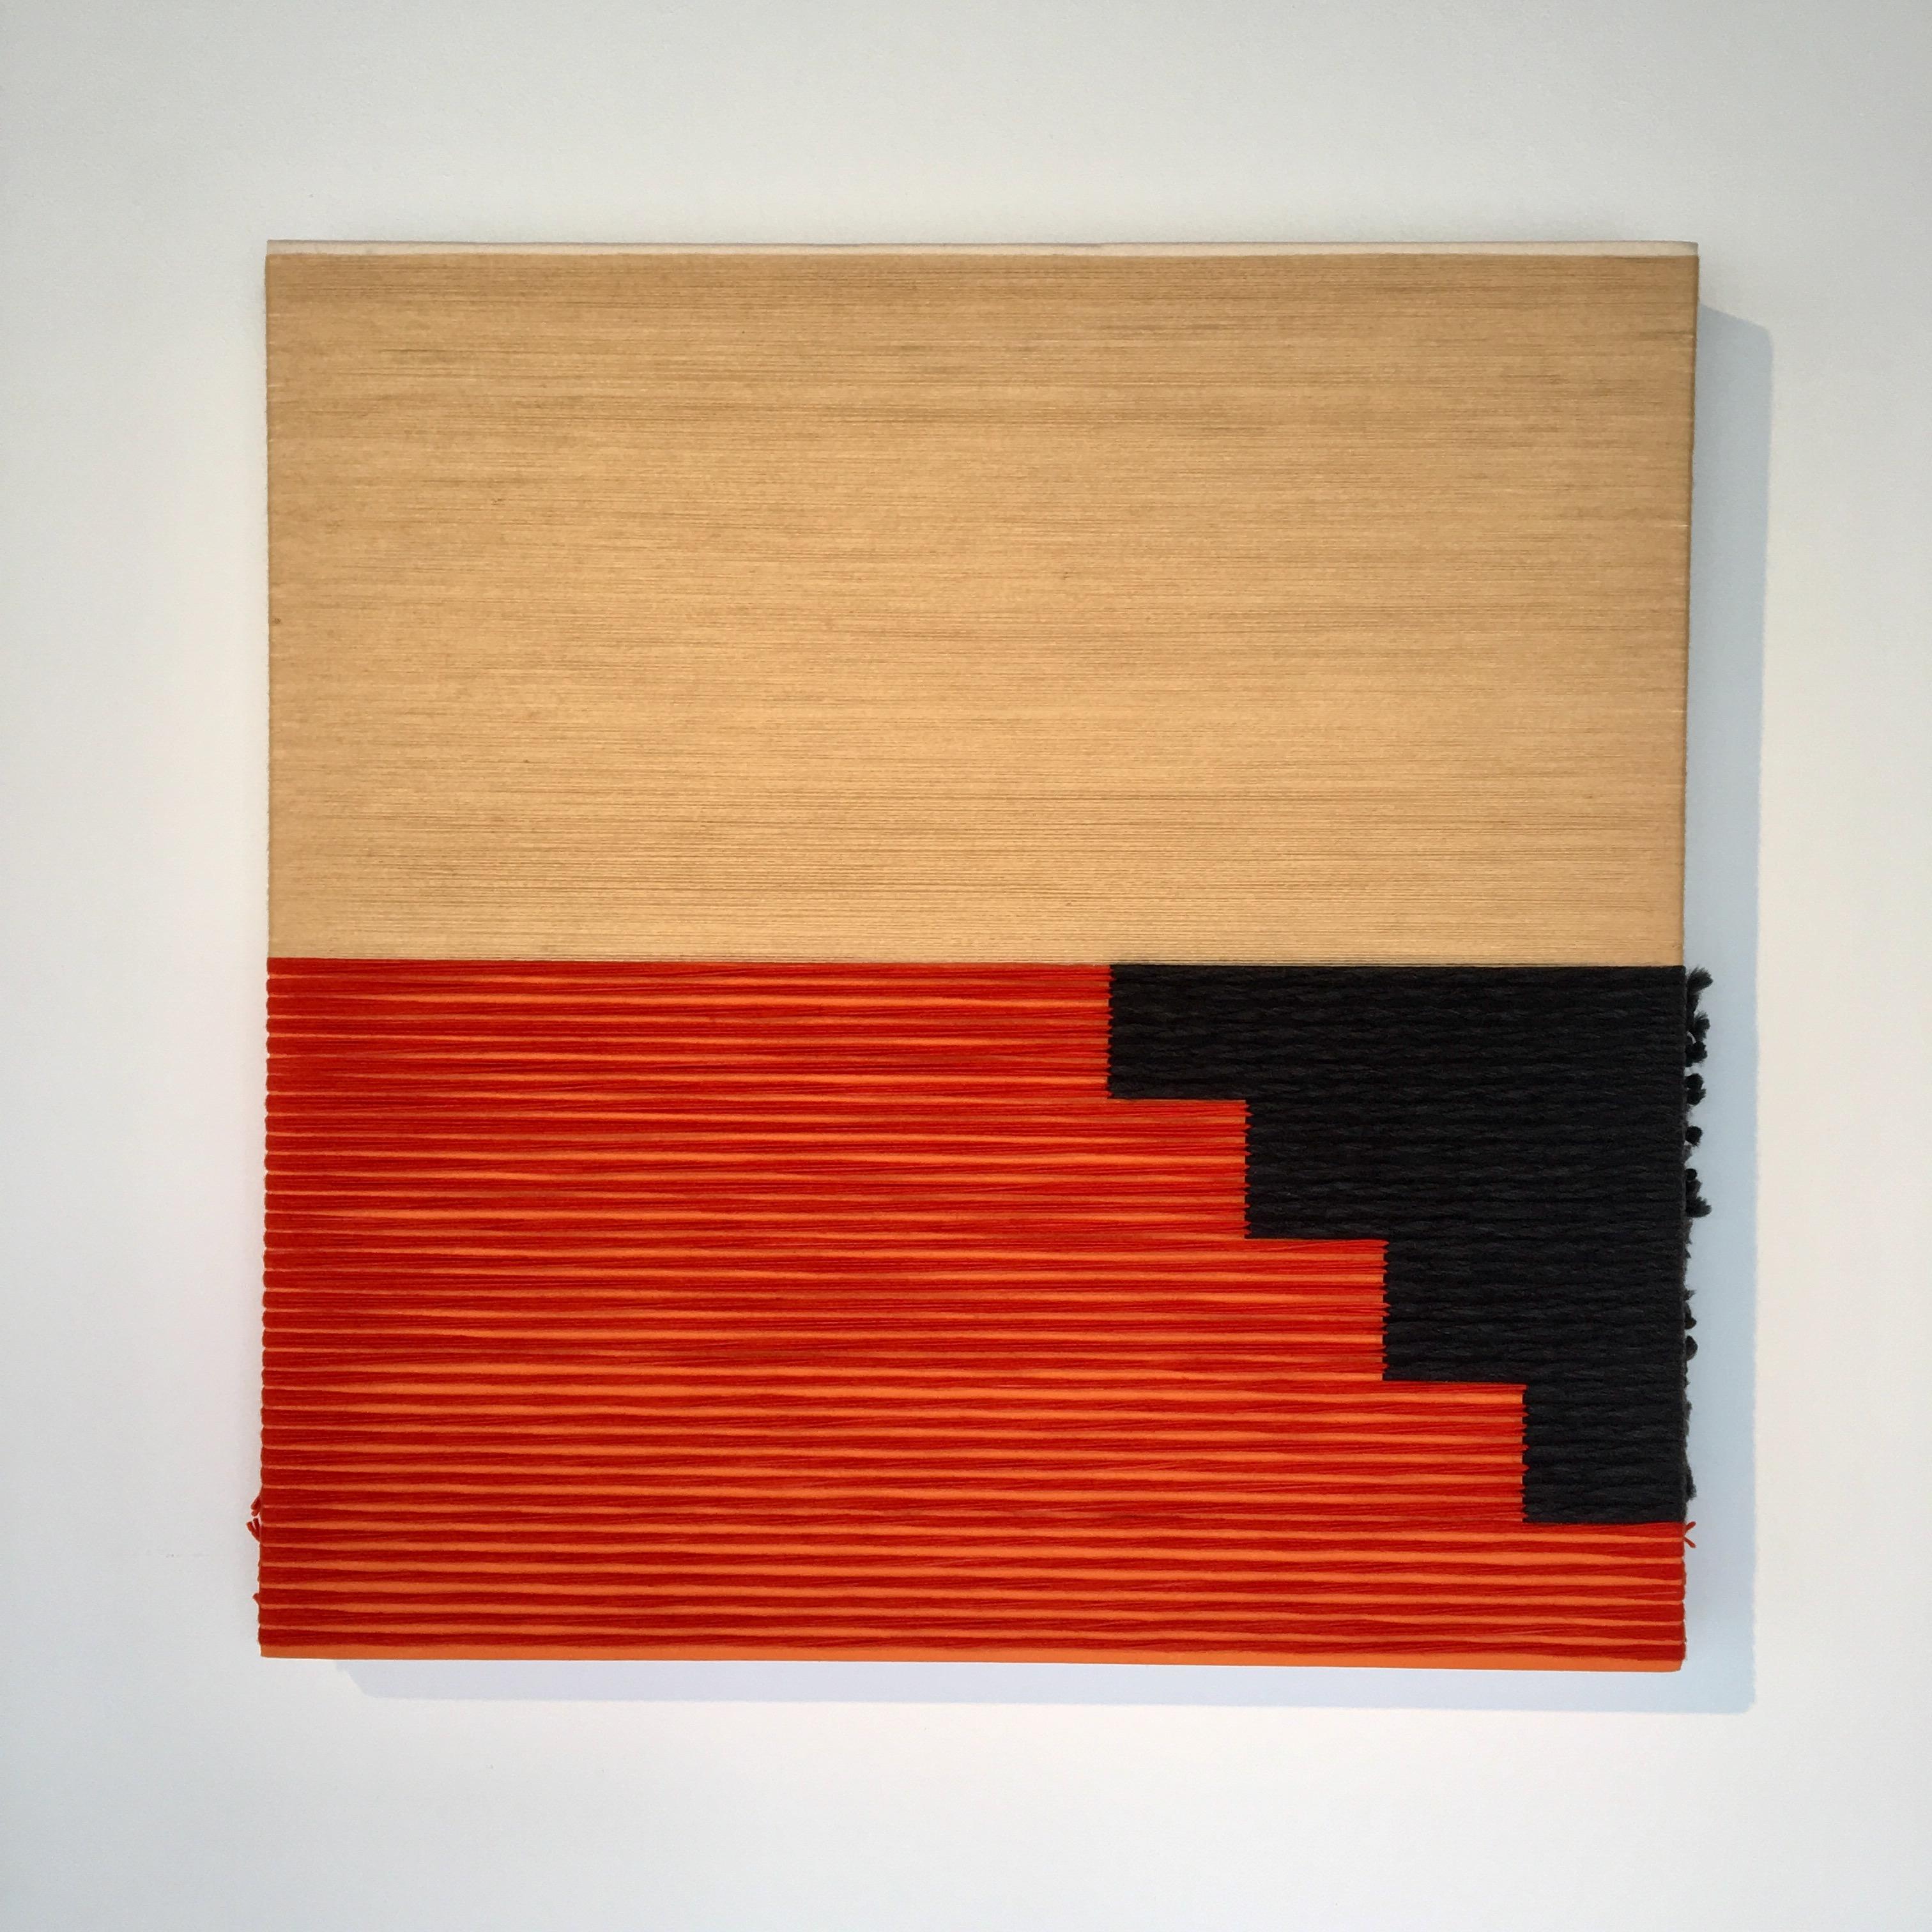 CONTEMPORARY TEXTILE ART, Minimalist, Iranian Wool, Beige Black and Orange, 2019 - Mixed Media Art by Marco Querin